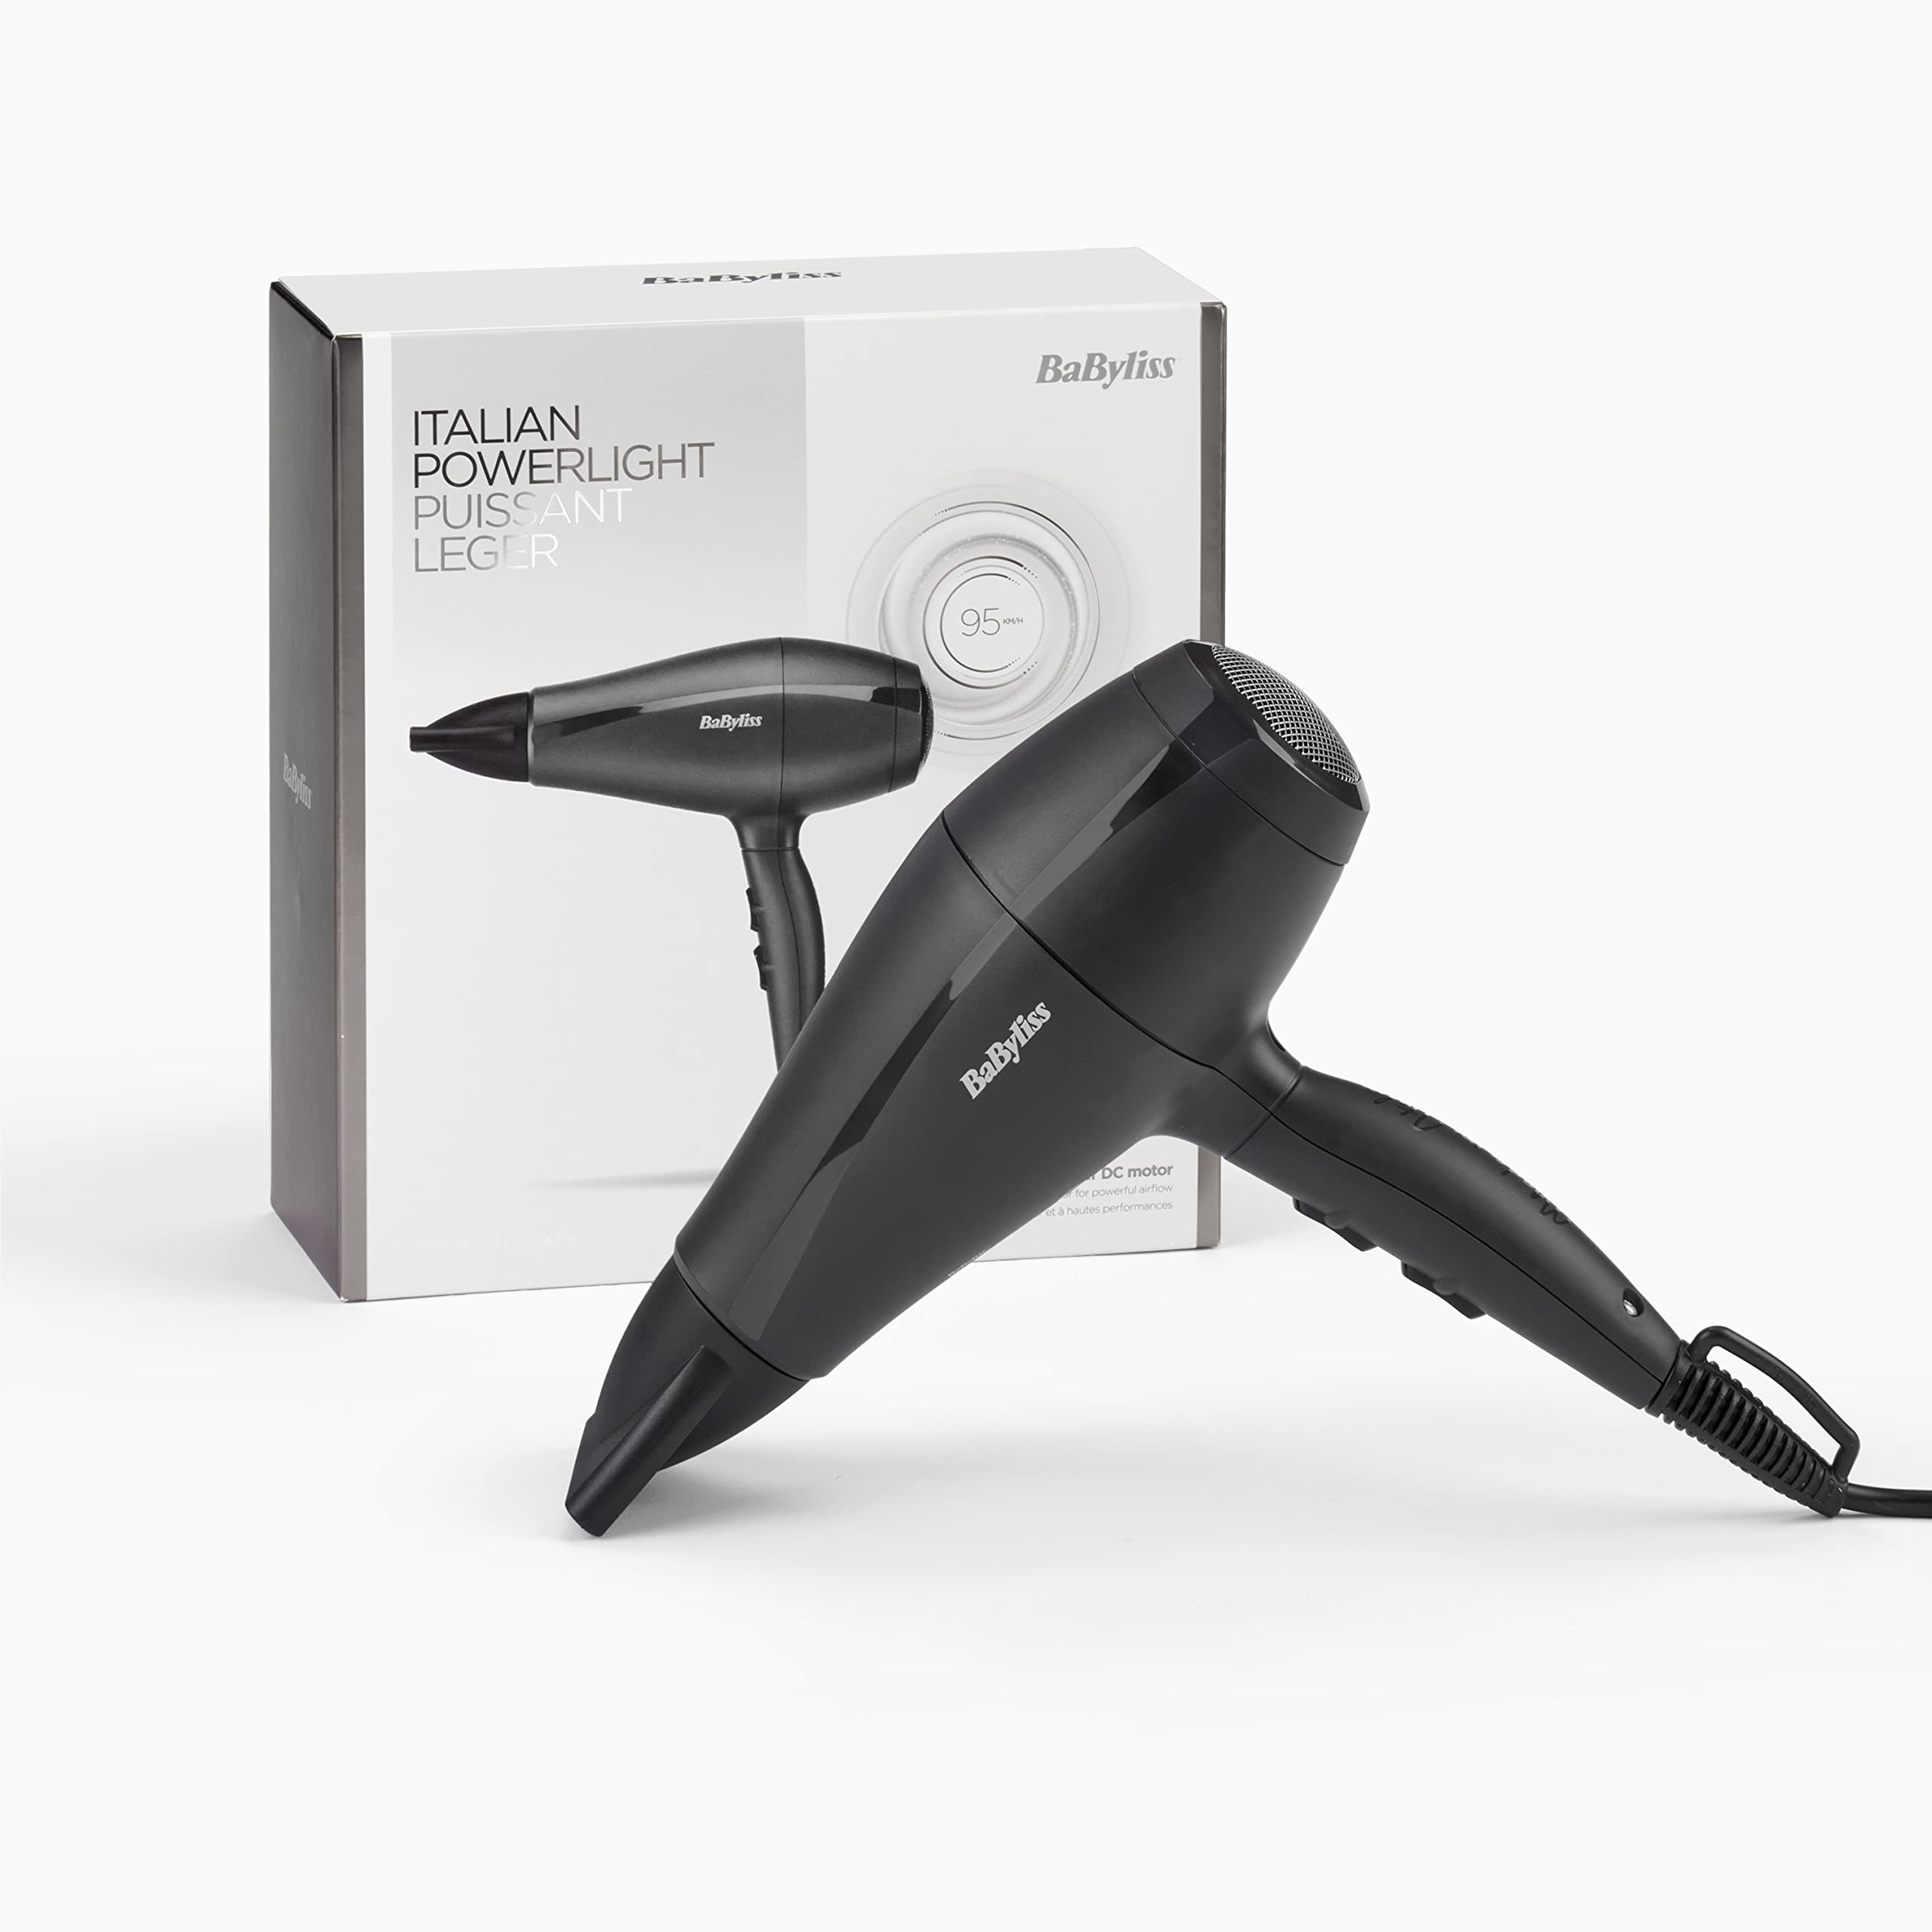 BaByliss Italian-made Hairdryer| 2000w Performance With High Torque Motor | Adjustable Speed Settings & Lightweight & Portable | Professional-grade Results With Italian Made Quality (OPEN-BOX)